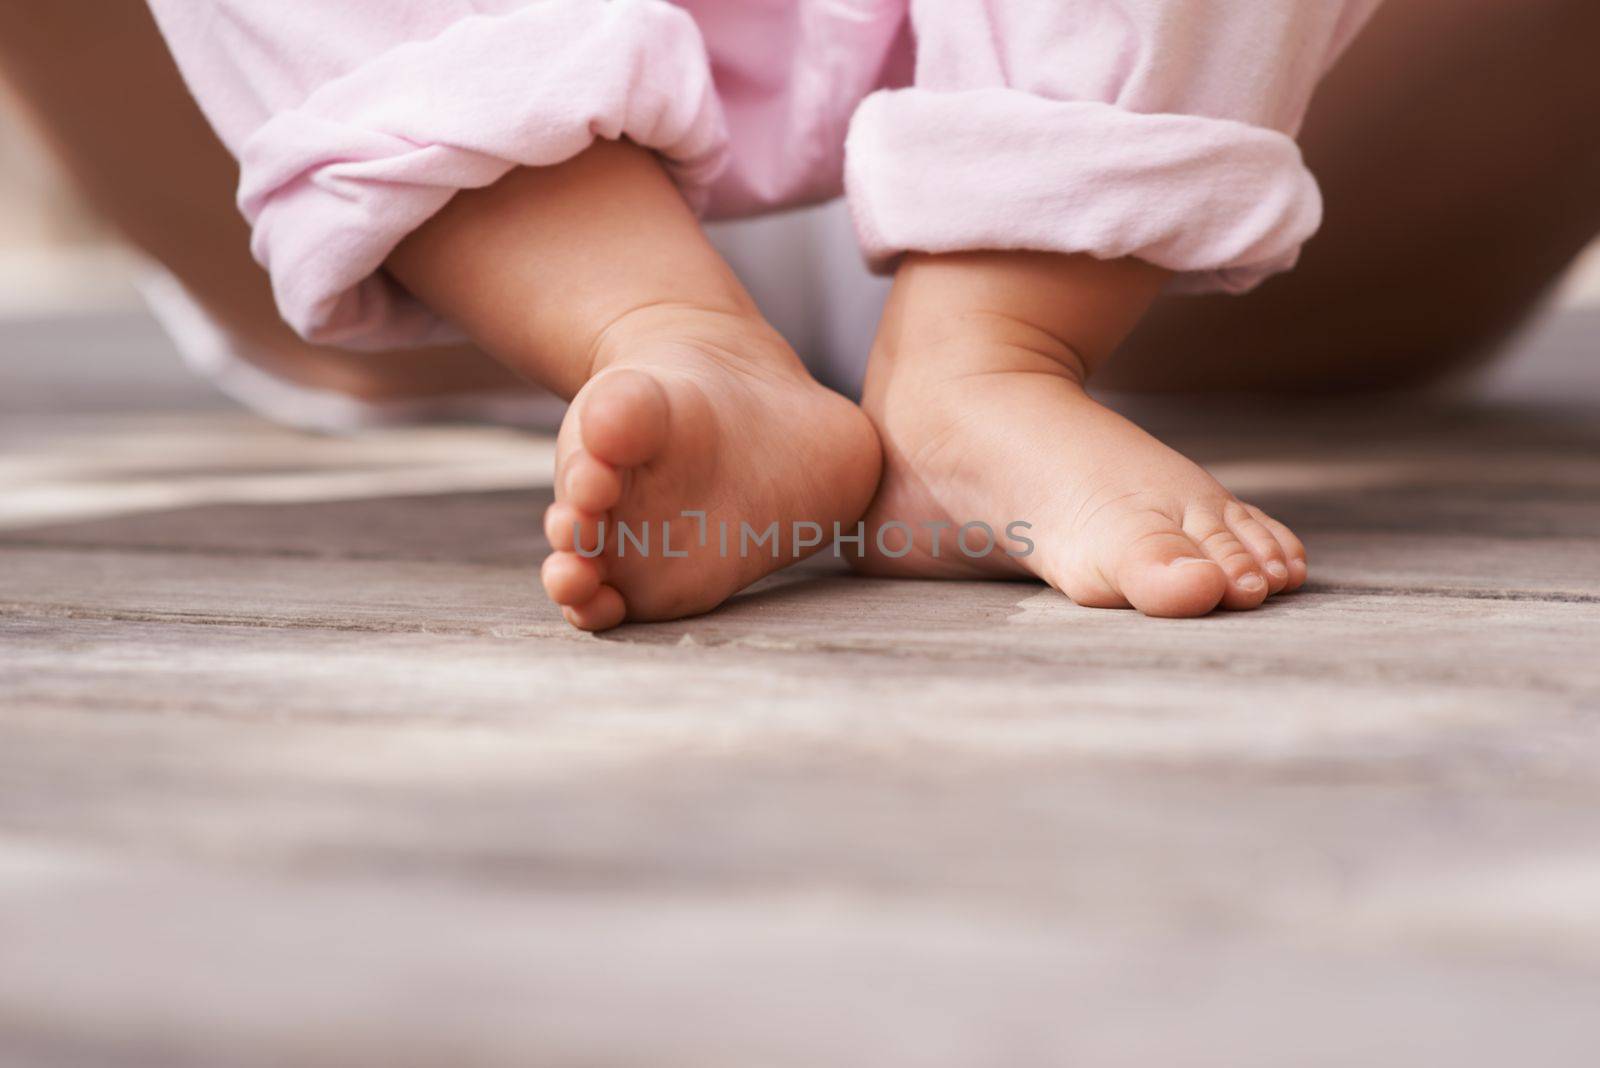 Teeny tiny toes. Closeup image of a babys feet as she sits outside with her mother